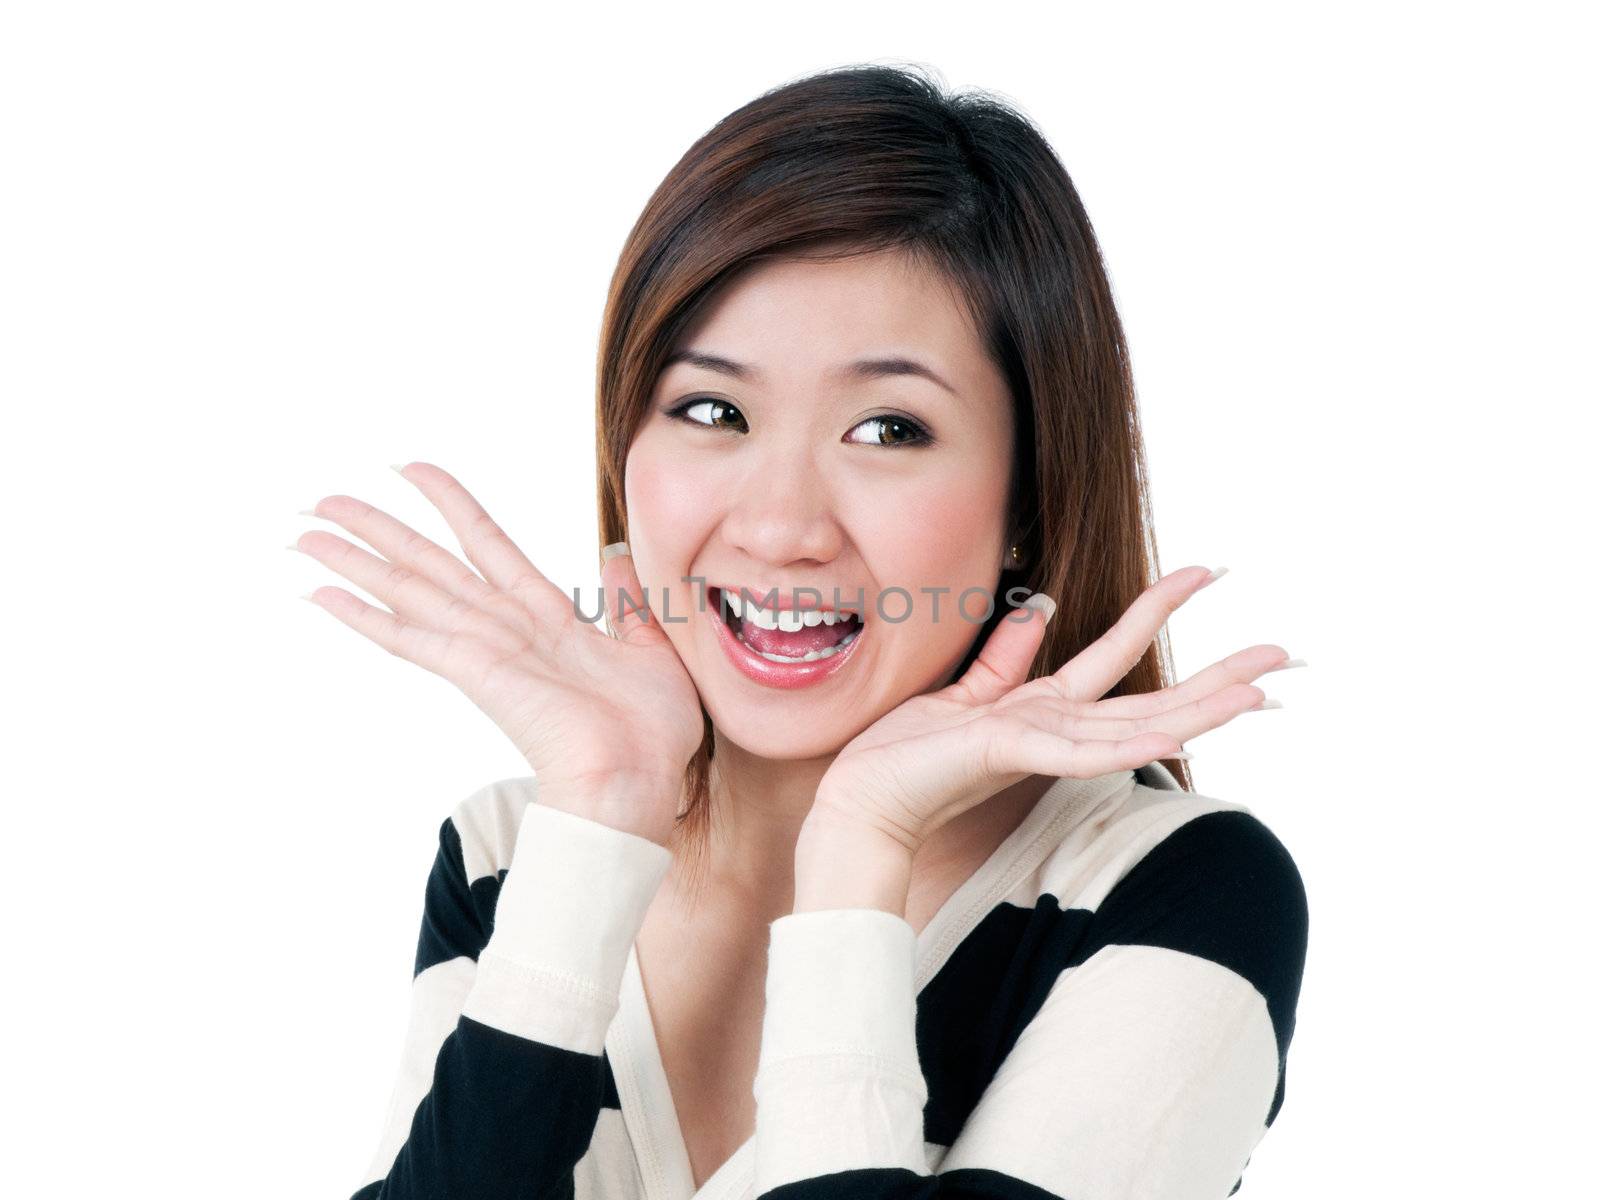 Portrait of an attractive young Asian woman looking surprised over white background.